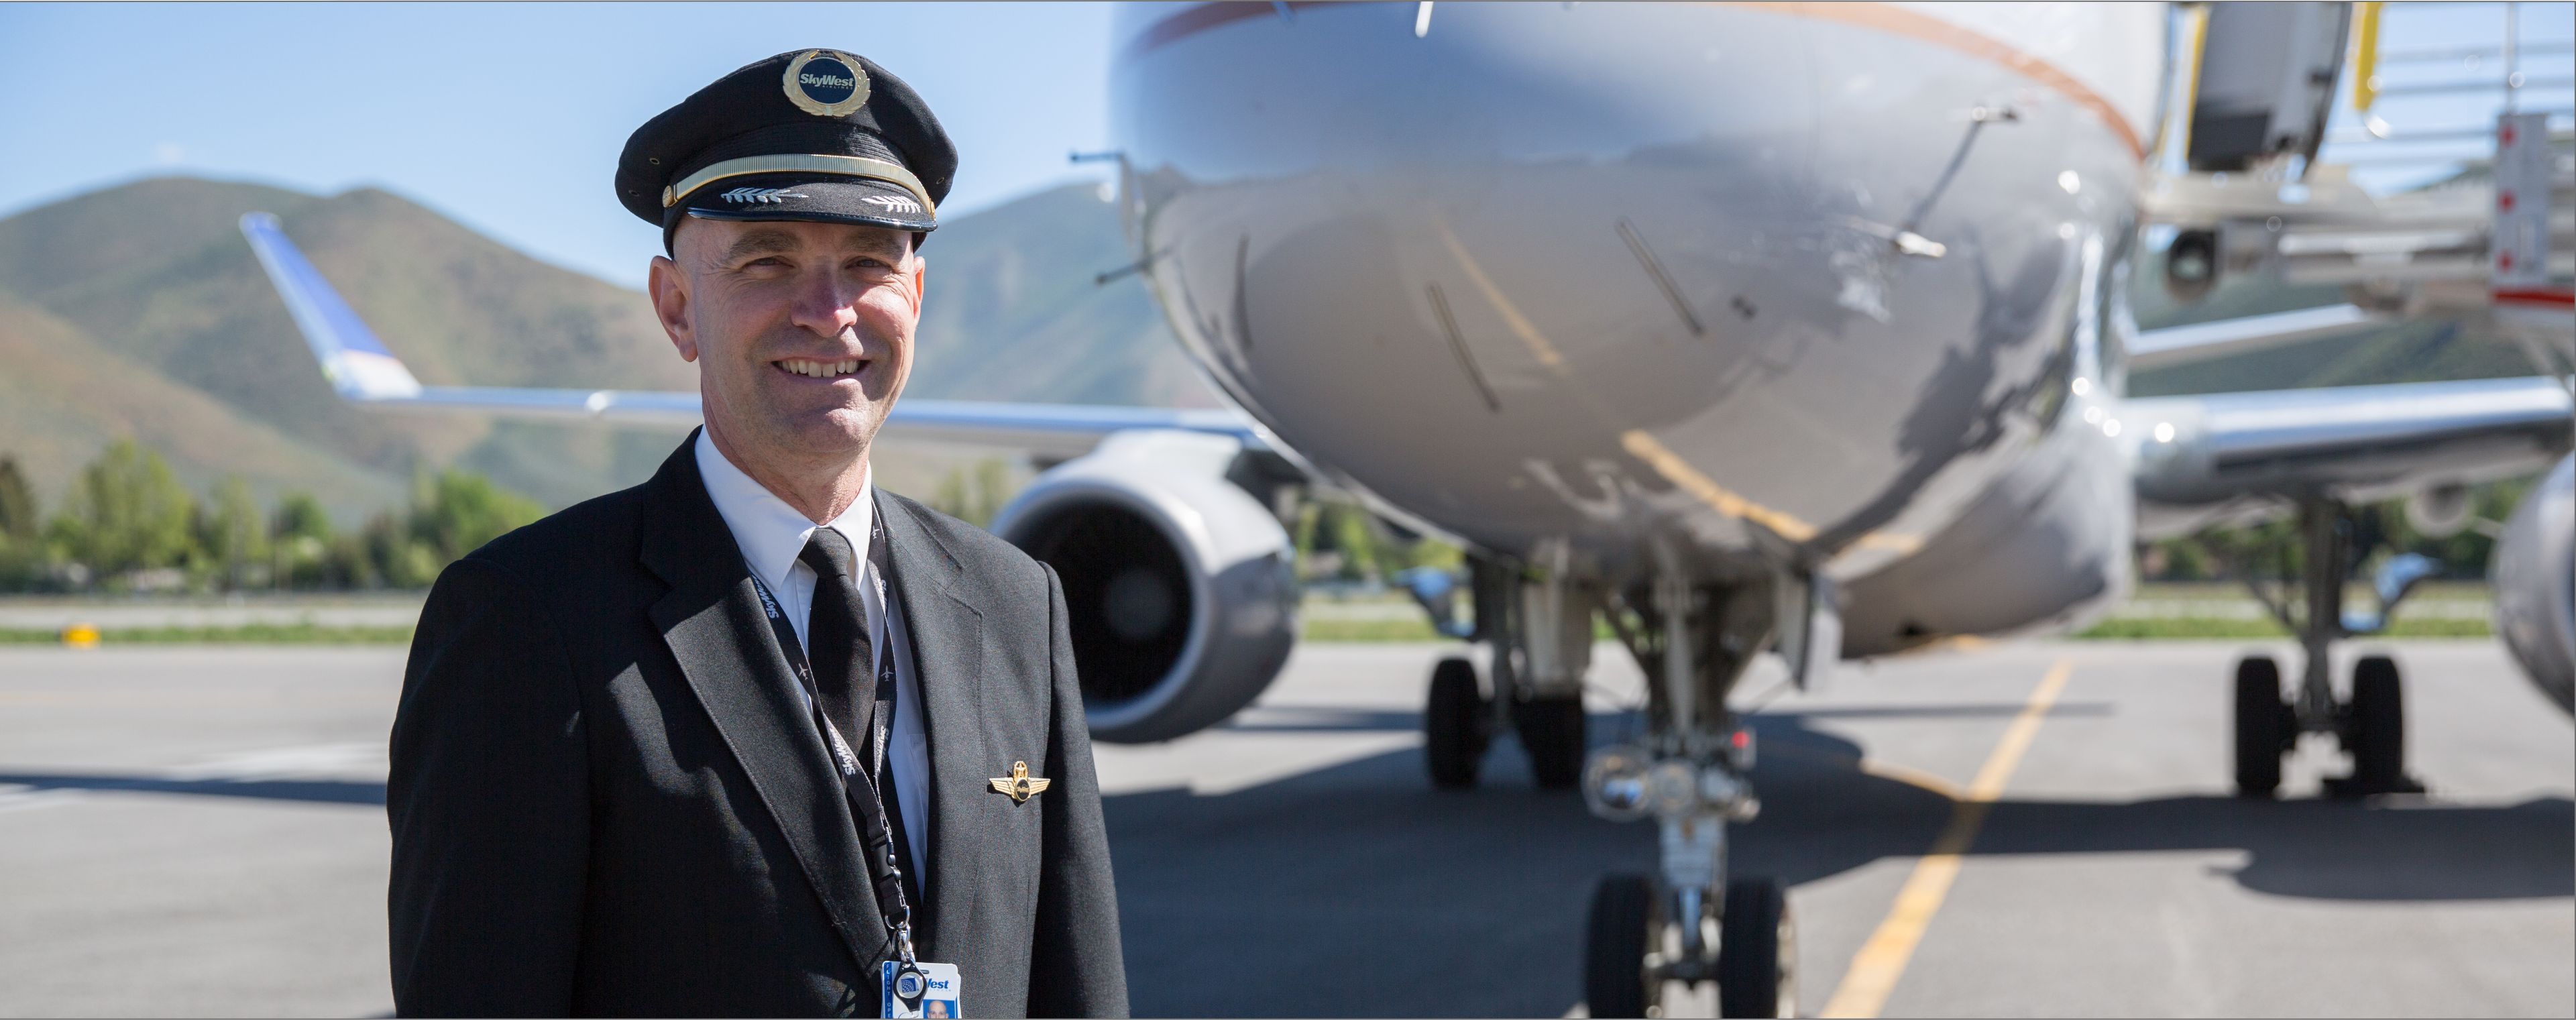 6 of the Best Things About Being a Pilot AeroGuard